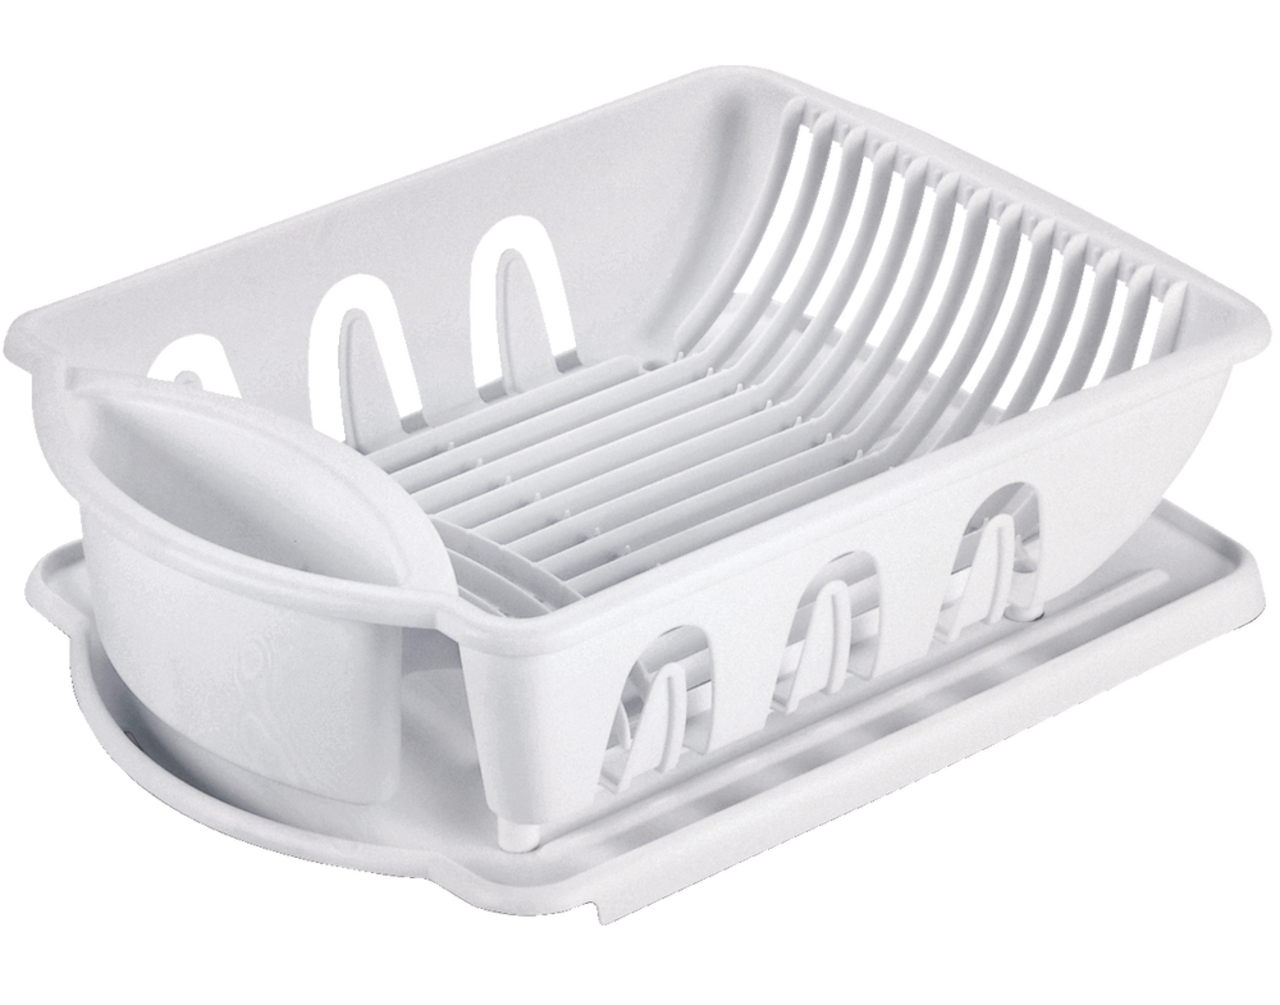 https://media-www.canadiantire.ca/product/living/home-organization/kitchen-organization/0421819/dish-drainer-tray-white-1-piece-26793d1a-477f-492f-98f3-e81bfc38141b.png?imdensity=1&imwidth=640&impolicy=mZoom